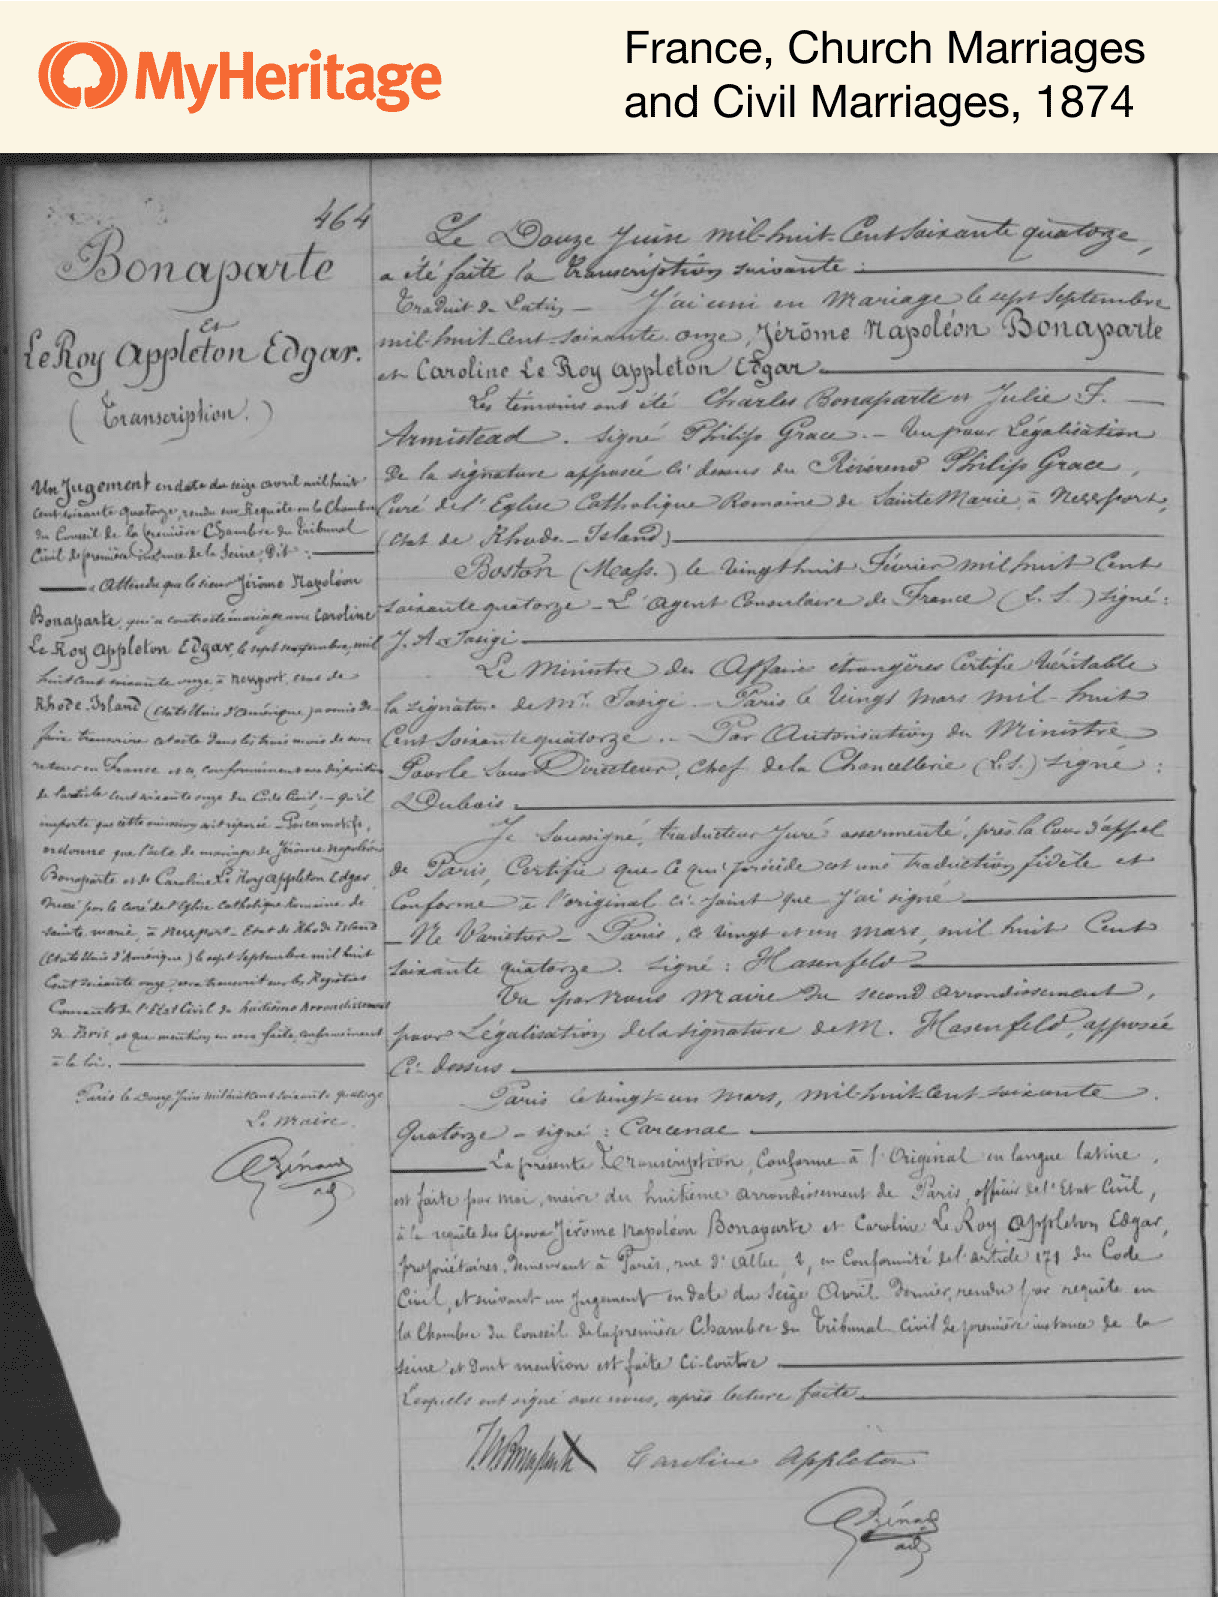 French document from June 12, 1874 stating that the marriage of Jerome Bonaparte and Caroline Appleton took place on September 7, 1871 in Newport, Rhode Island.